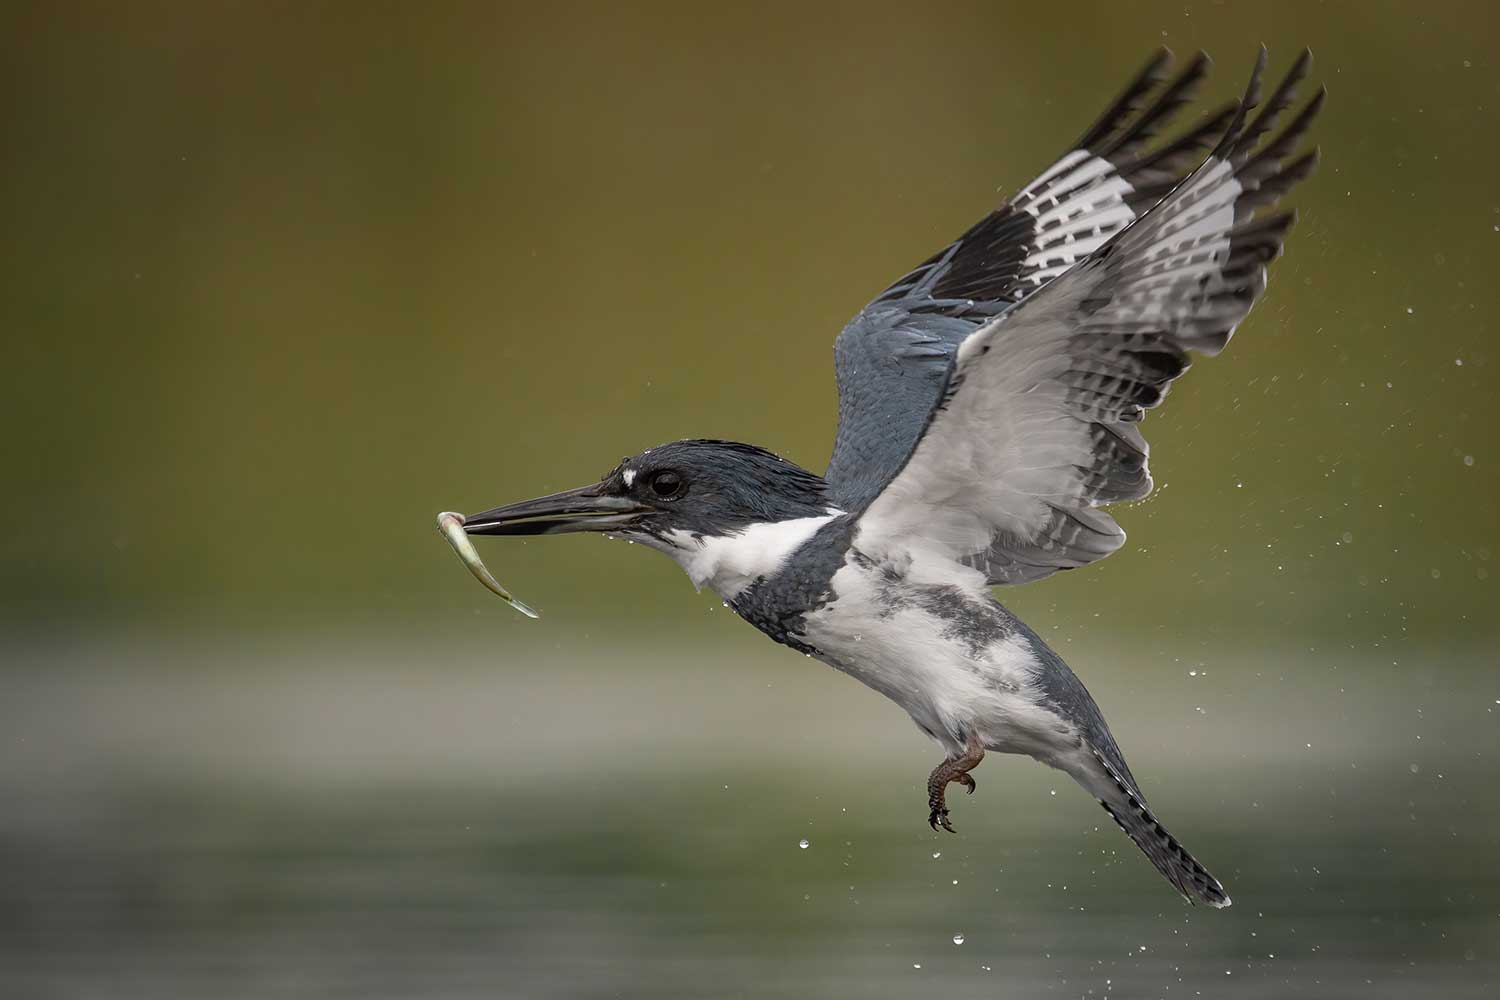 A belted kingfisher with a fish in its mouth.